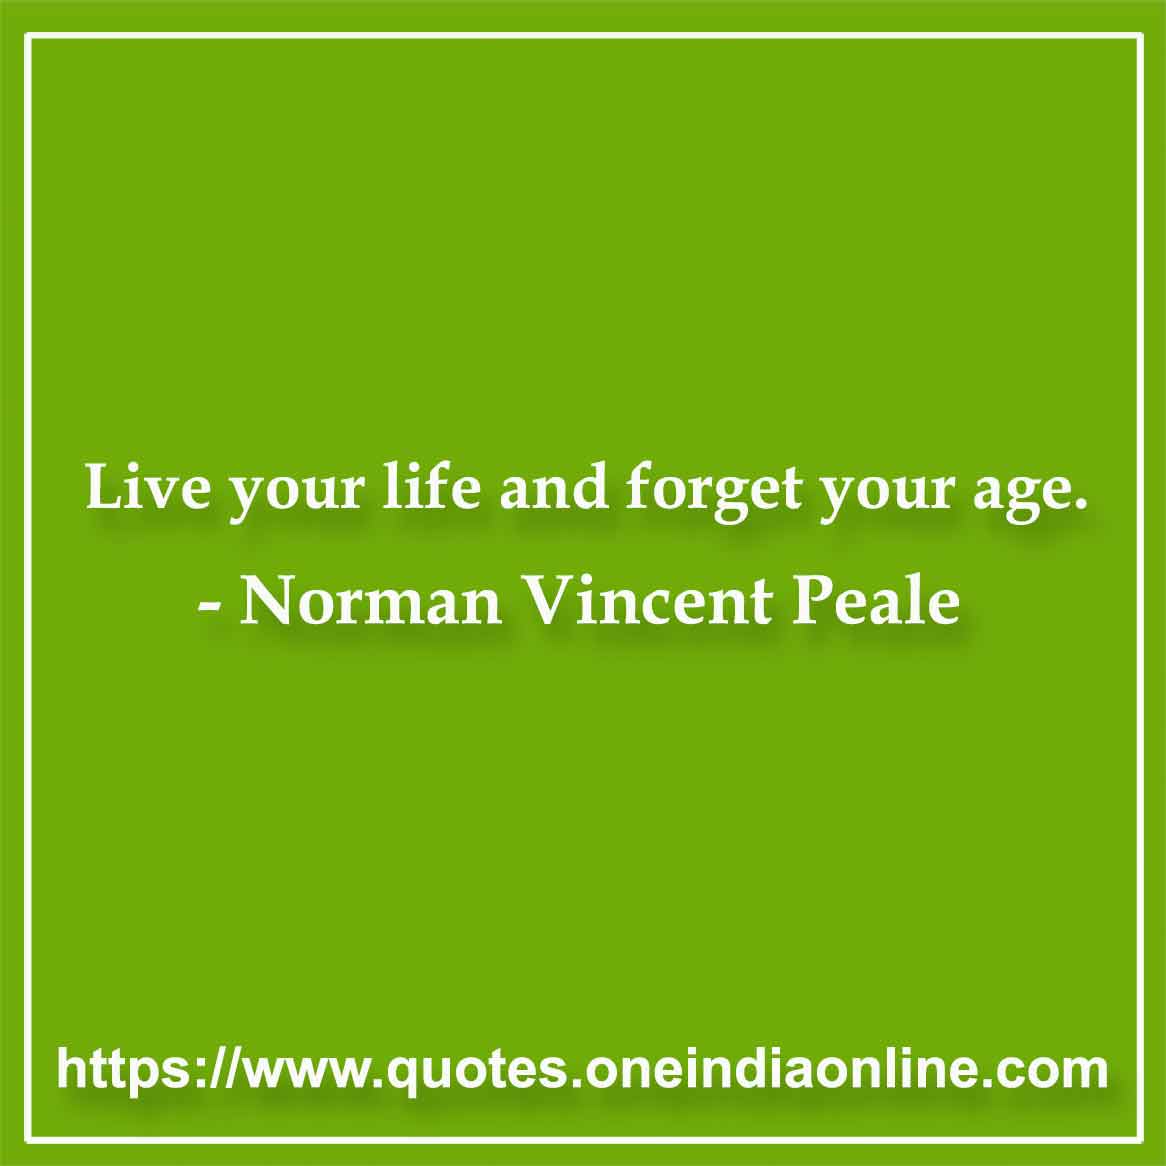 Live your life and forget your age. 

- Norman Vincent Peale